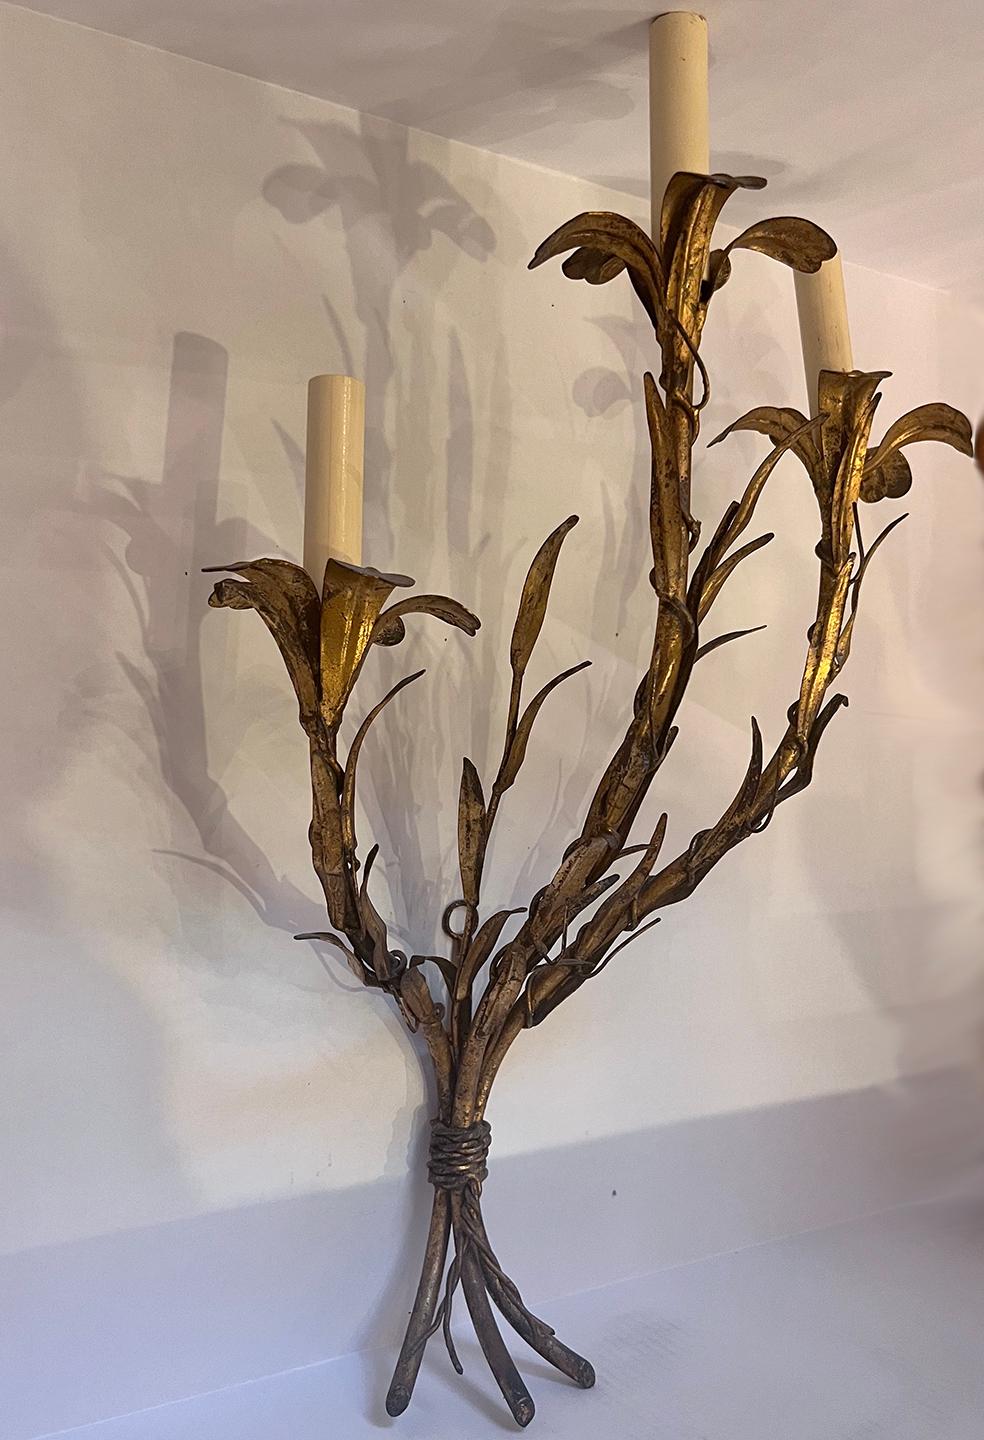 A pair of circa 1940's Italian gilt metal 3-light sconces in floral motif.

Measurements:
Height: 19.5